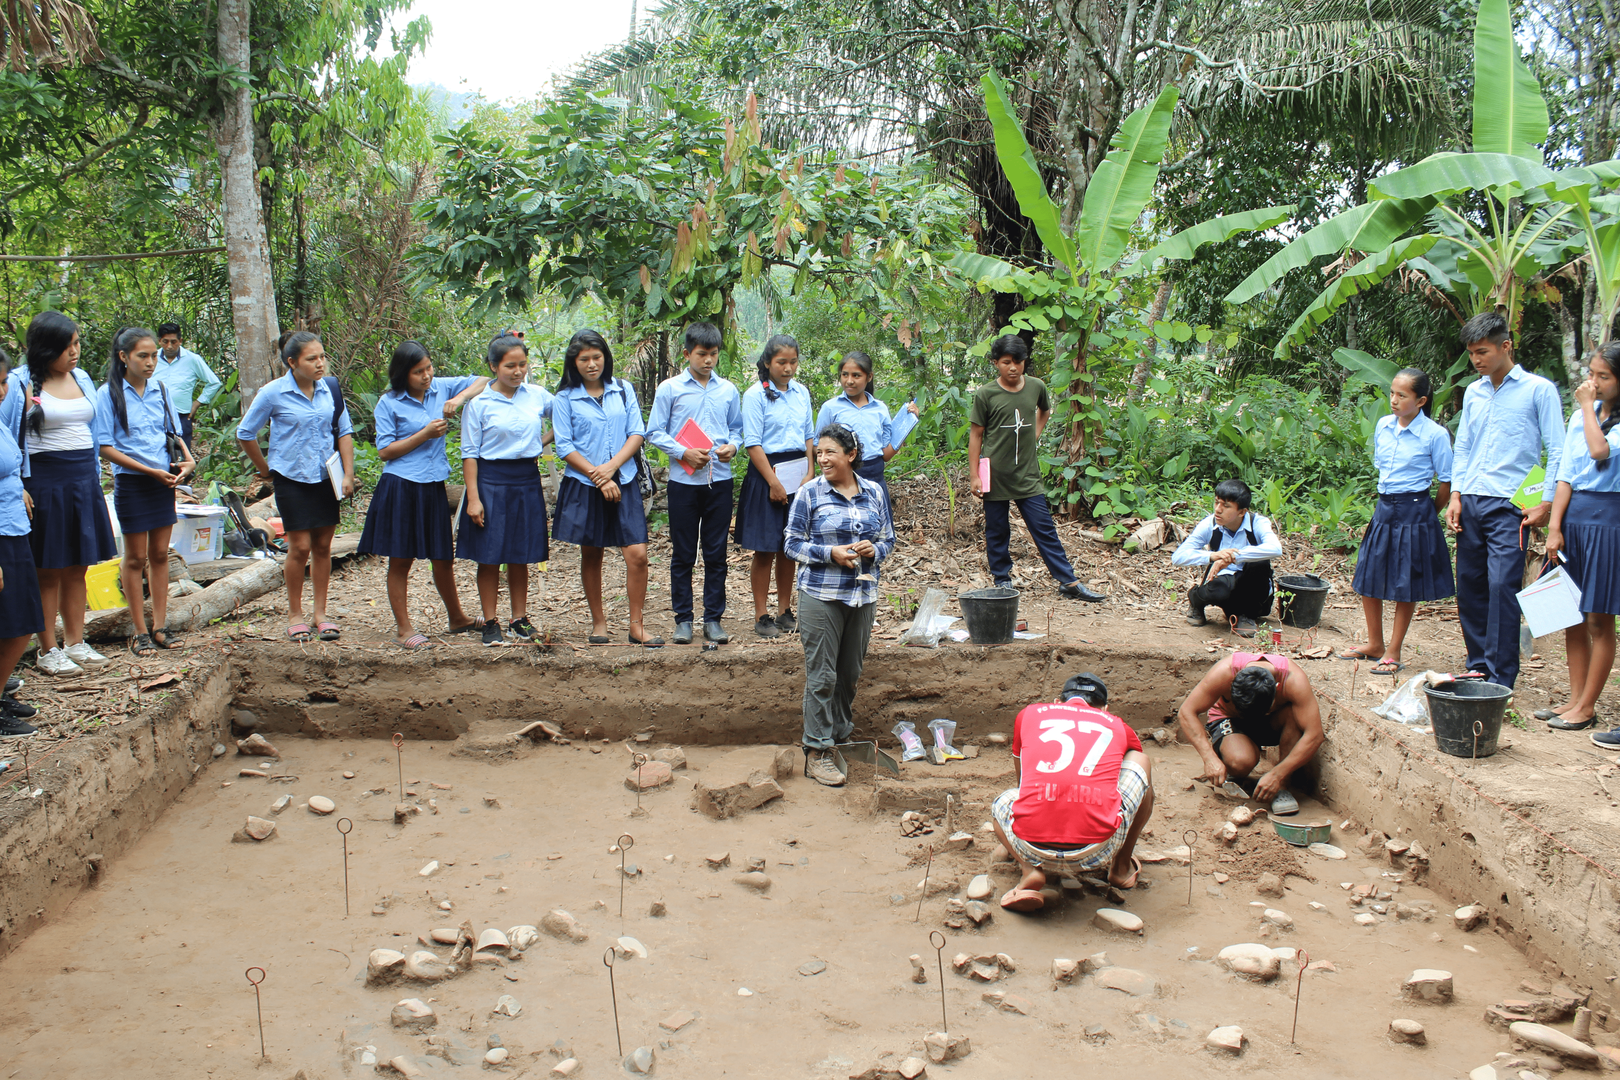 A brief explanation to local students on how the archaeological work is being carried out.